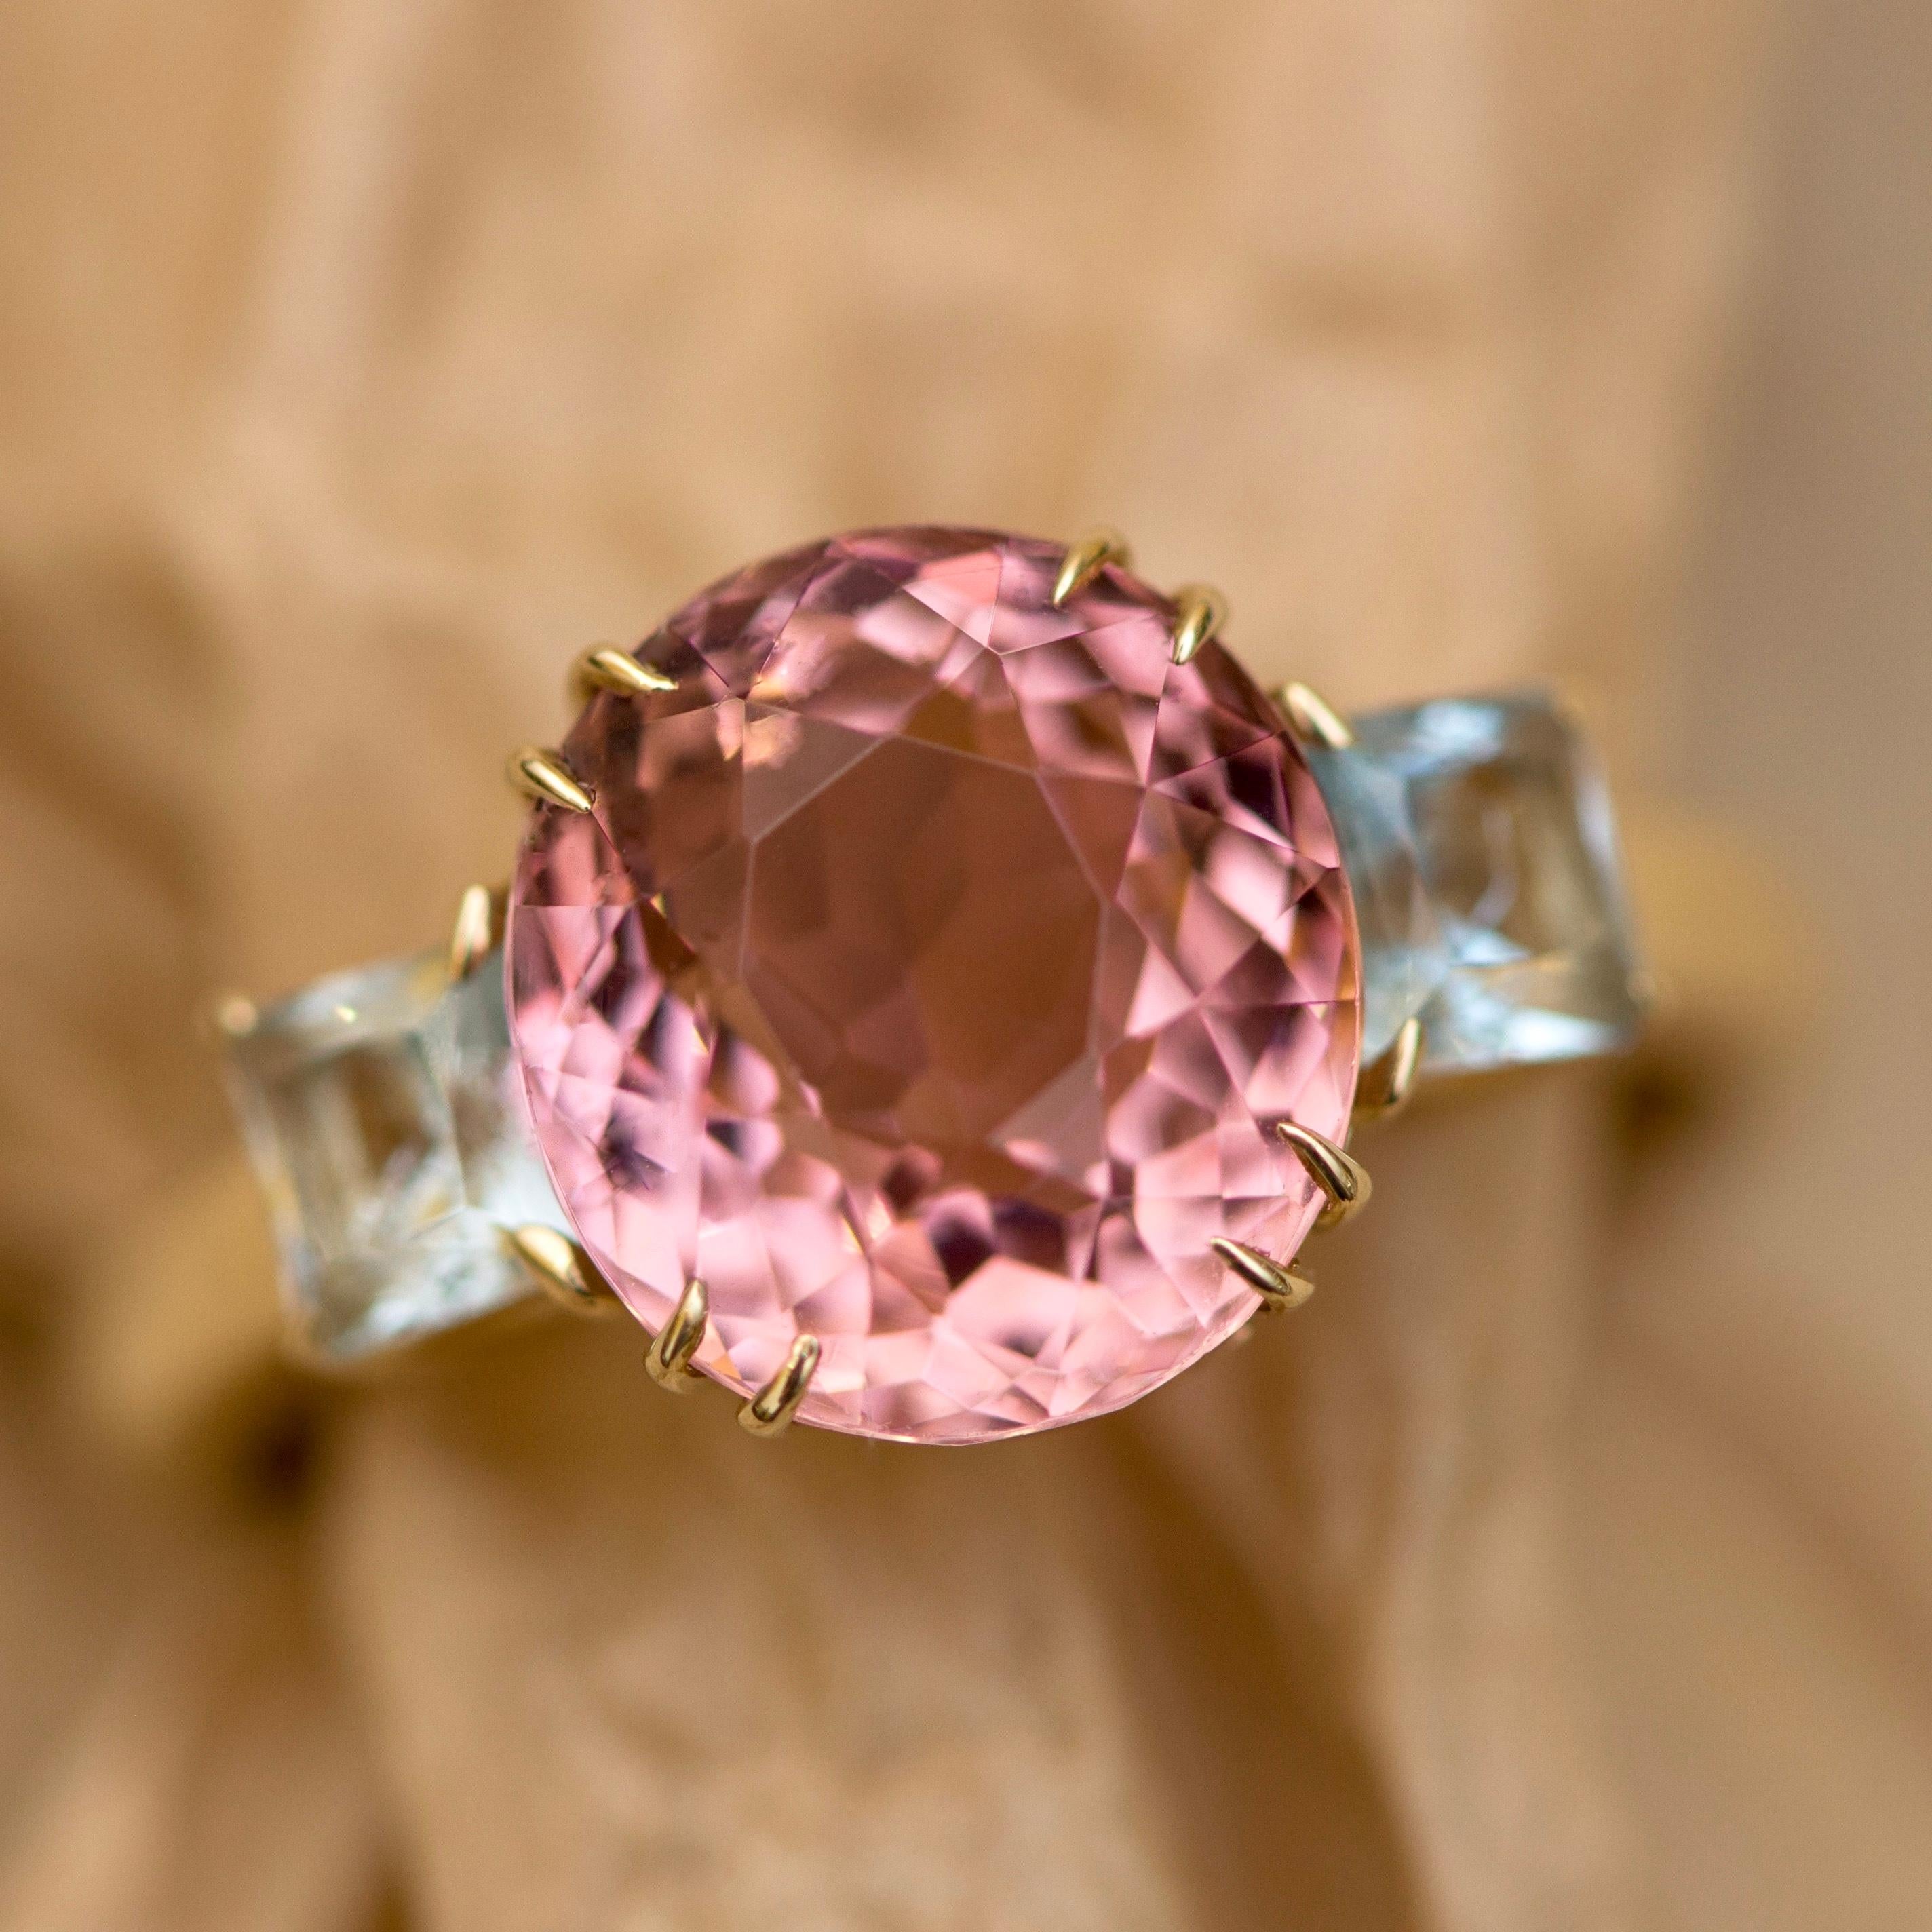 It is believed that pink tourmaline is a symbol of love and tenderness.
This tourmaline have very interesting pink hue - you could see delicate pink, dark pink, peach, little bit burgundy when you just move it.
It is very common thing for